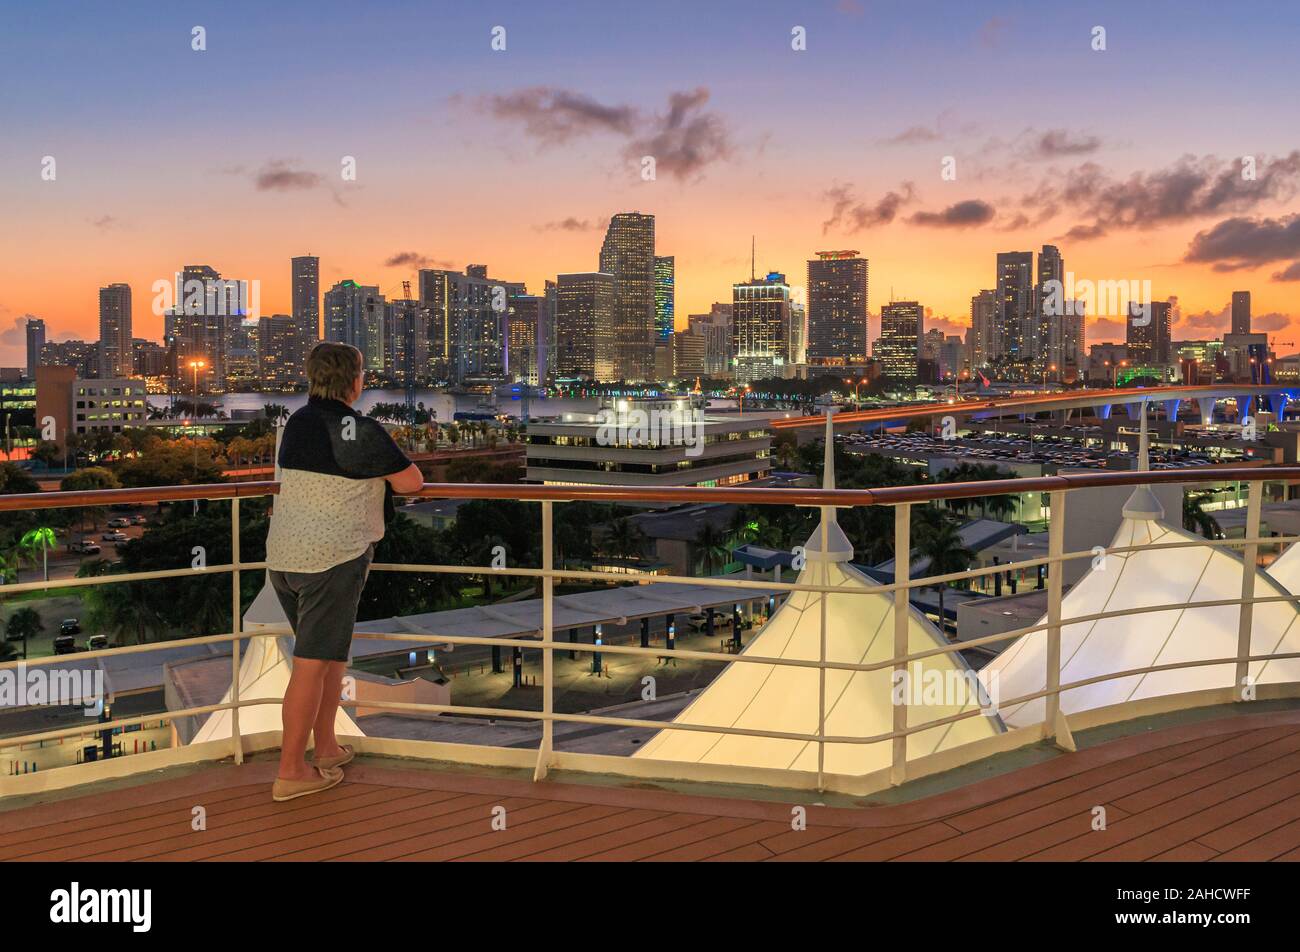 Woman overlooking the Miami Skyline after sunset from a Cruise ship railing Stock Photo